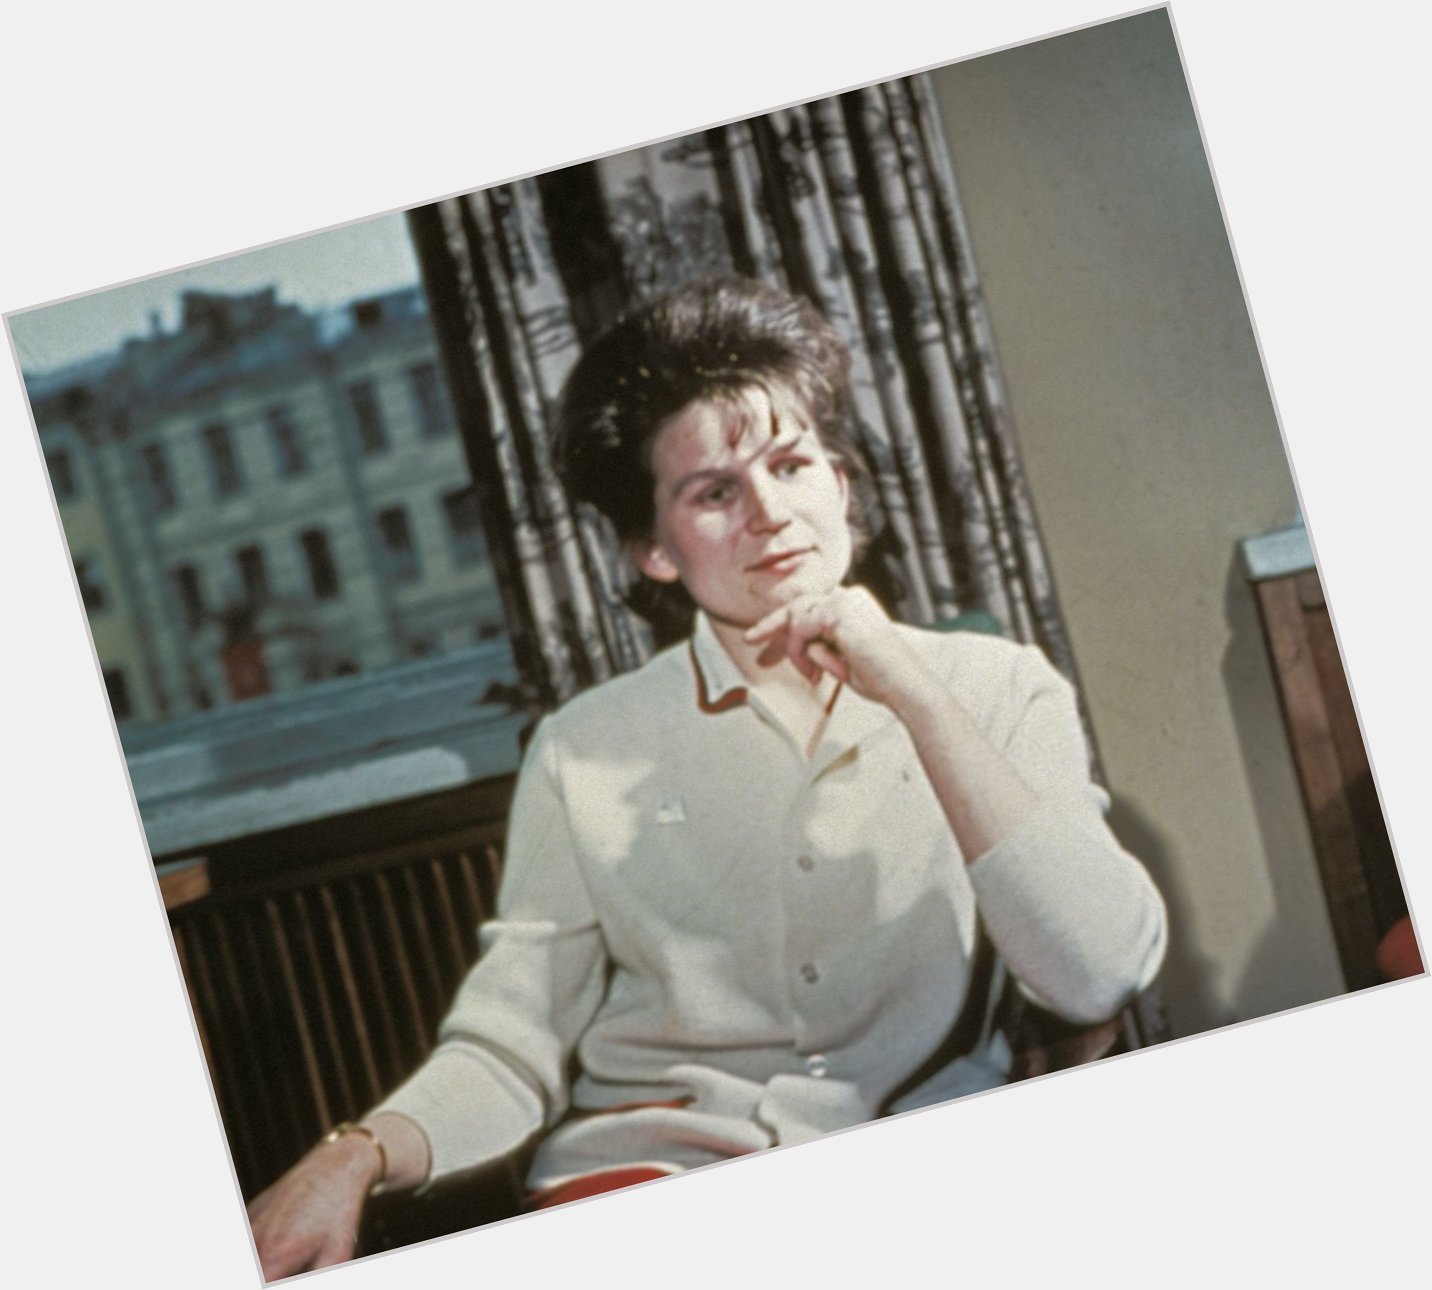 Good morning and happy birthday to valentina tereshkova, the first woman in space! 